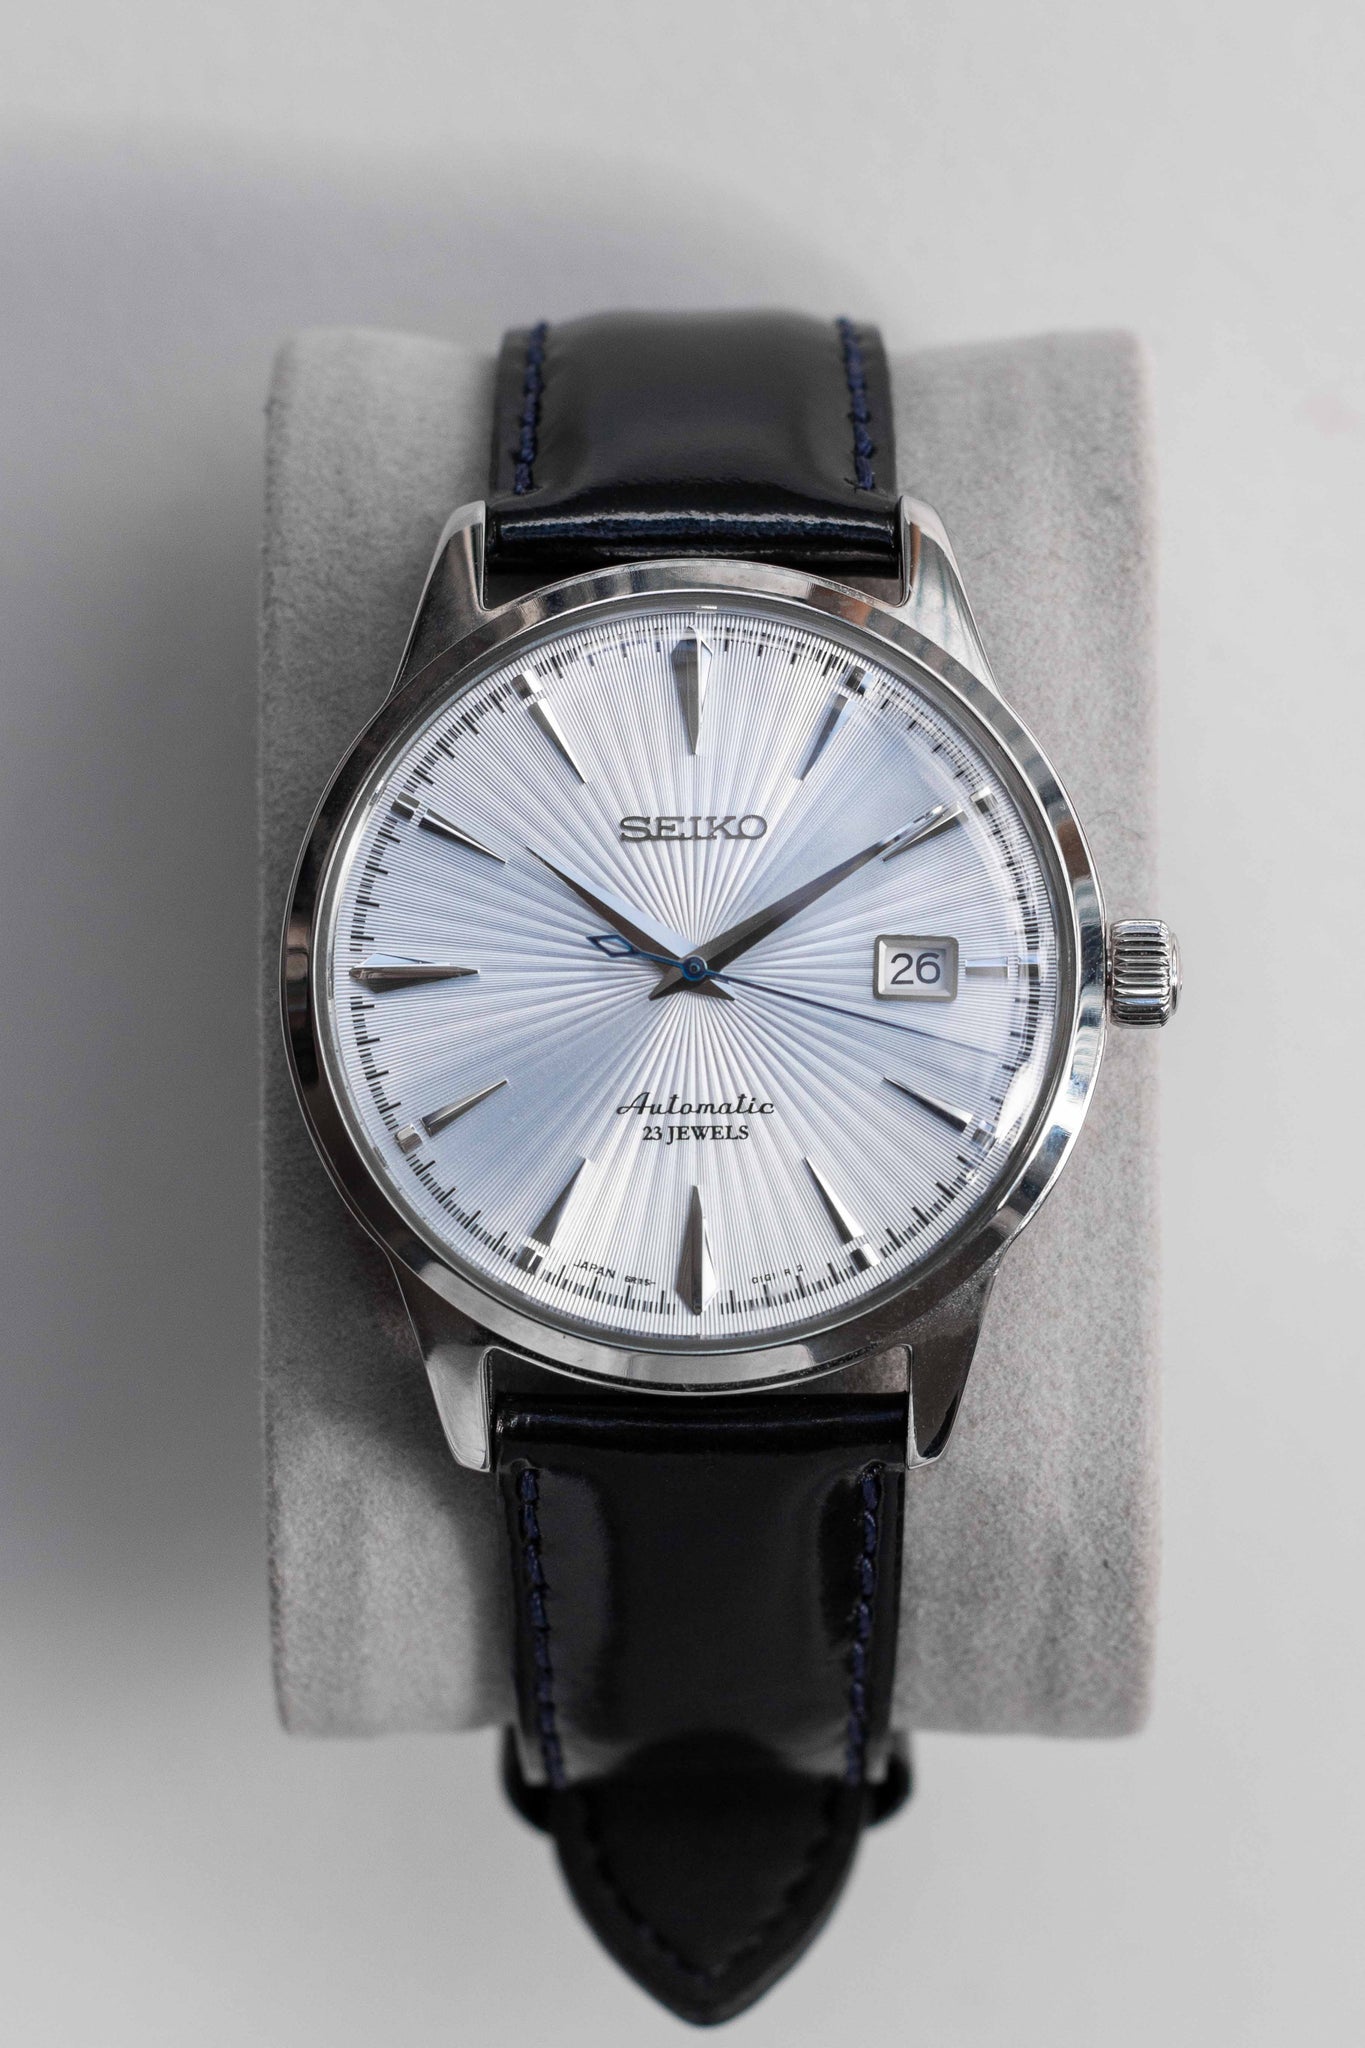 trojansk hest Temerity sagtmodighed Seiko Presage Cocktail Time Ref. SARB065 2017 w/ Box & Papers | Vintage &  Pre-Owned Luxury Watches – Wynn & Thayne